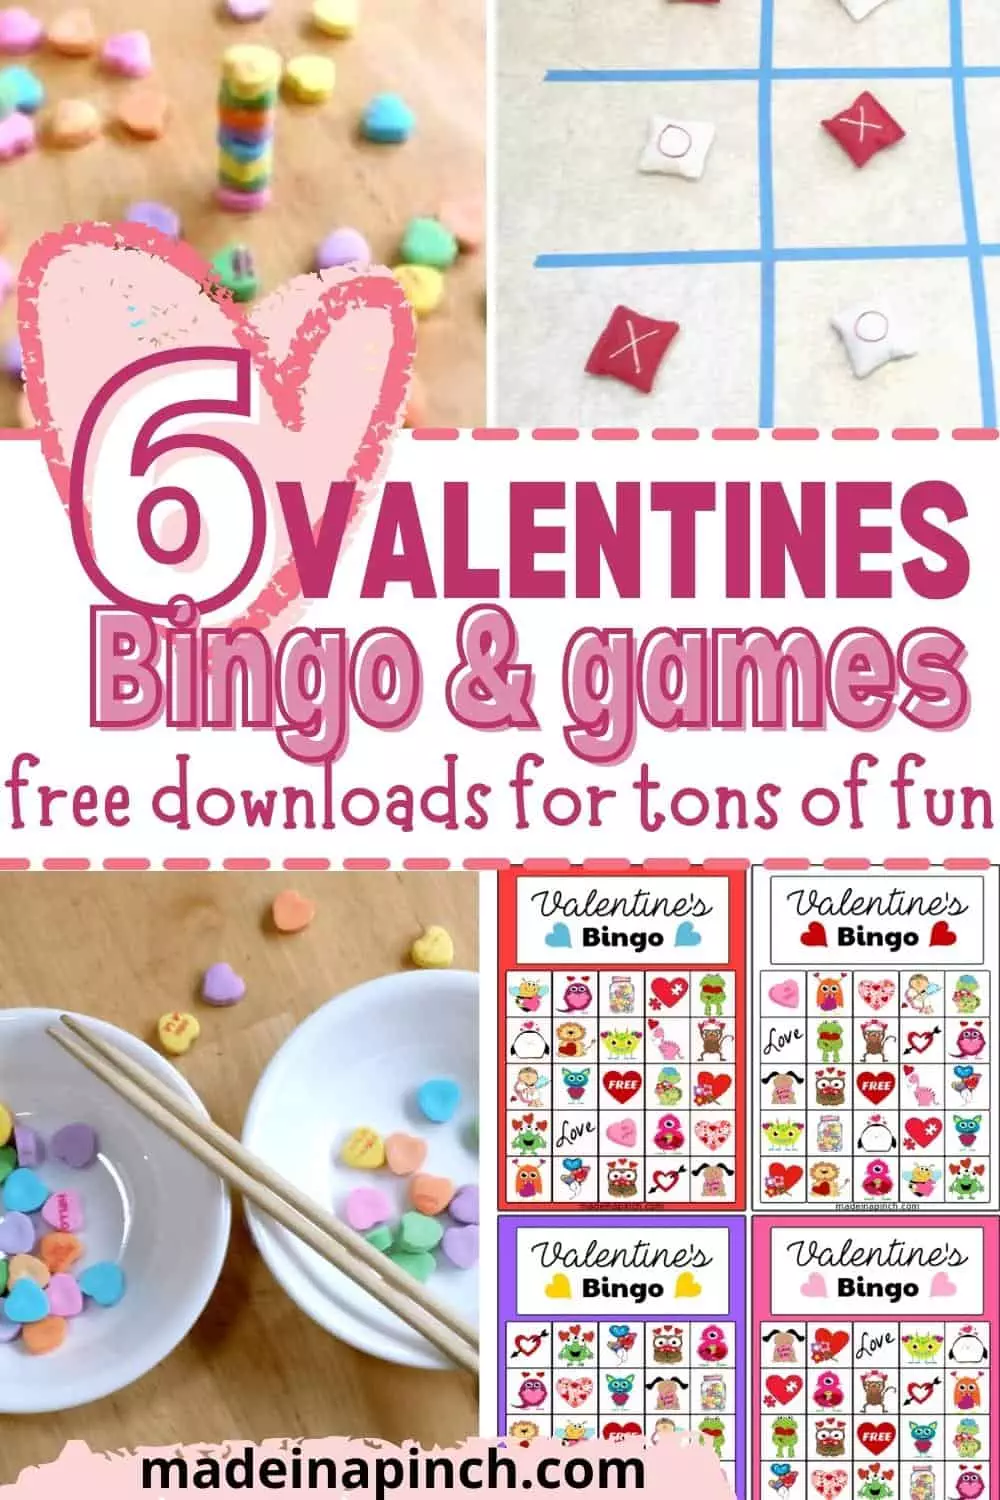 Valentines bingo and other activities image collage pin